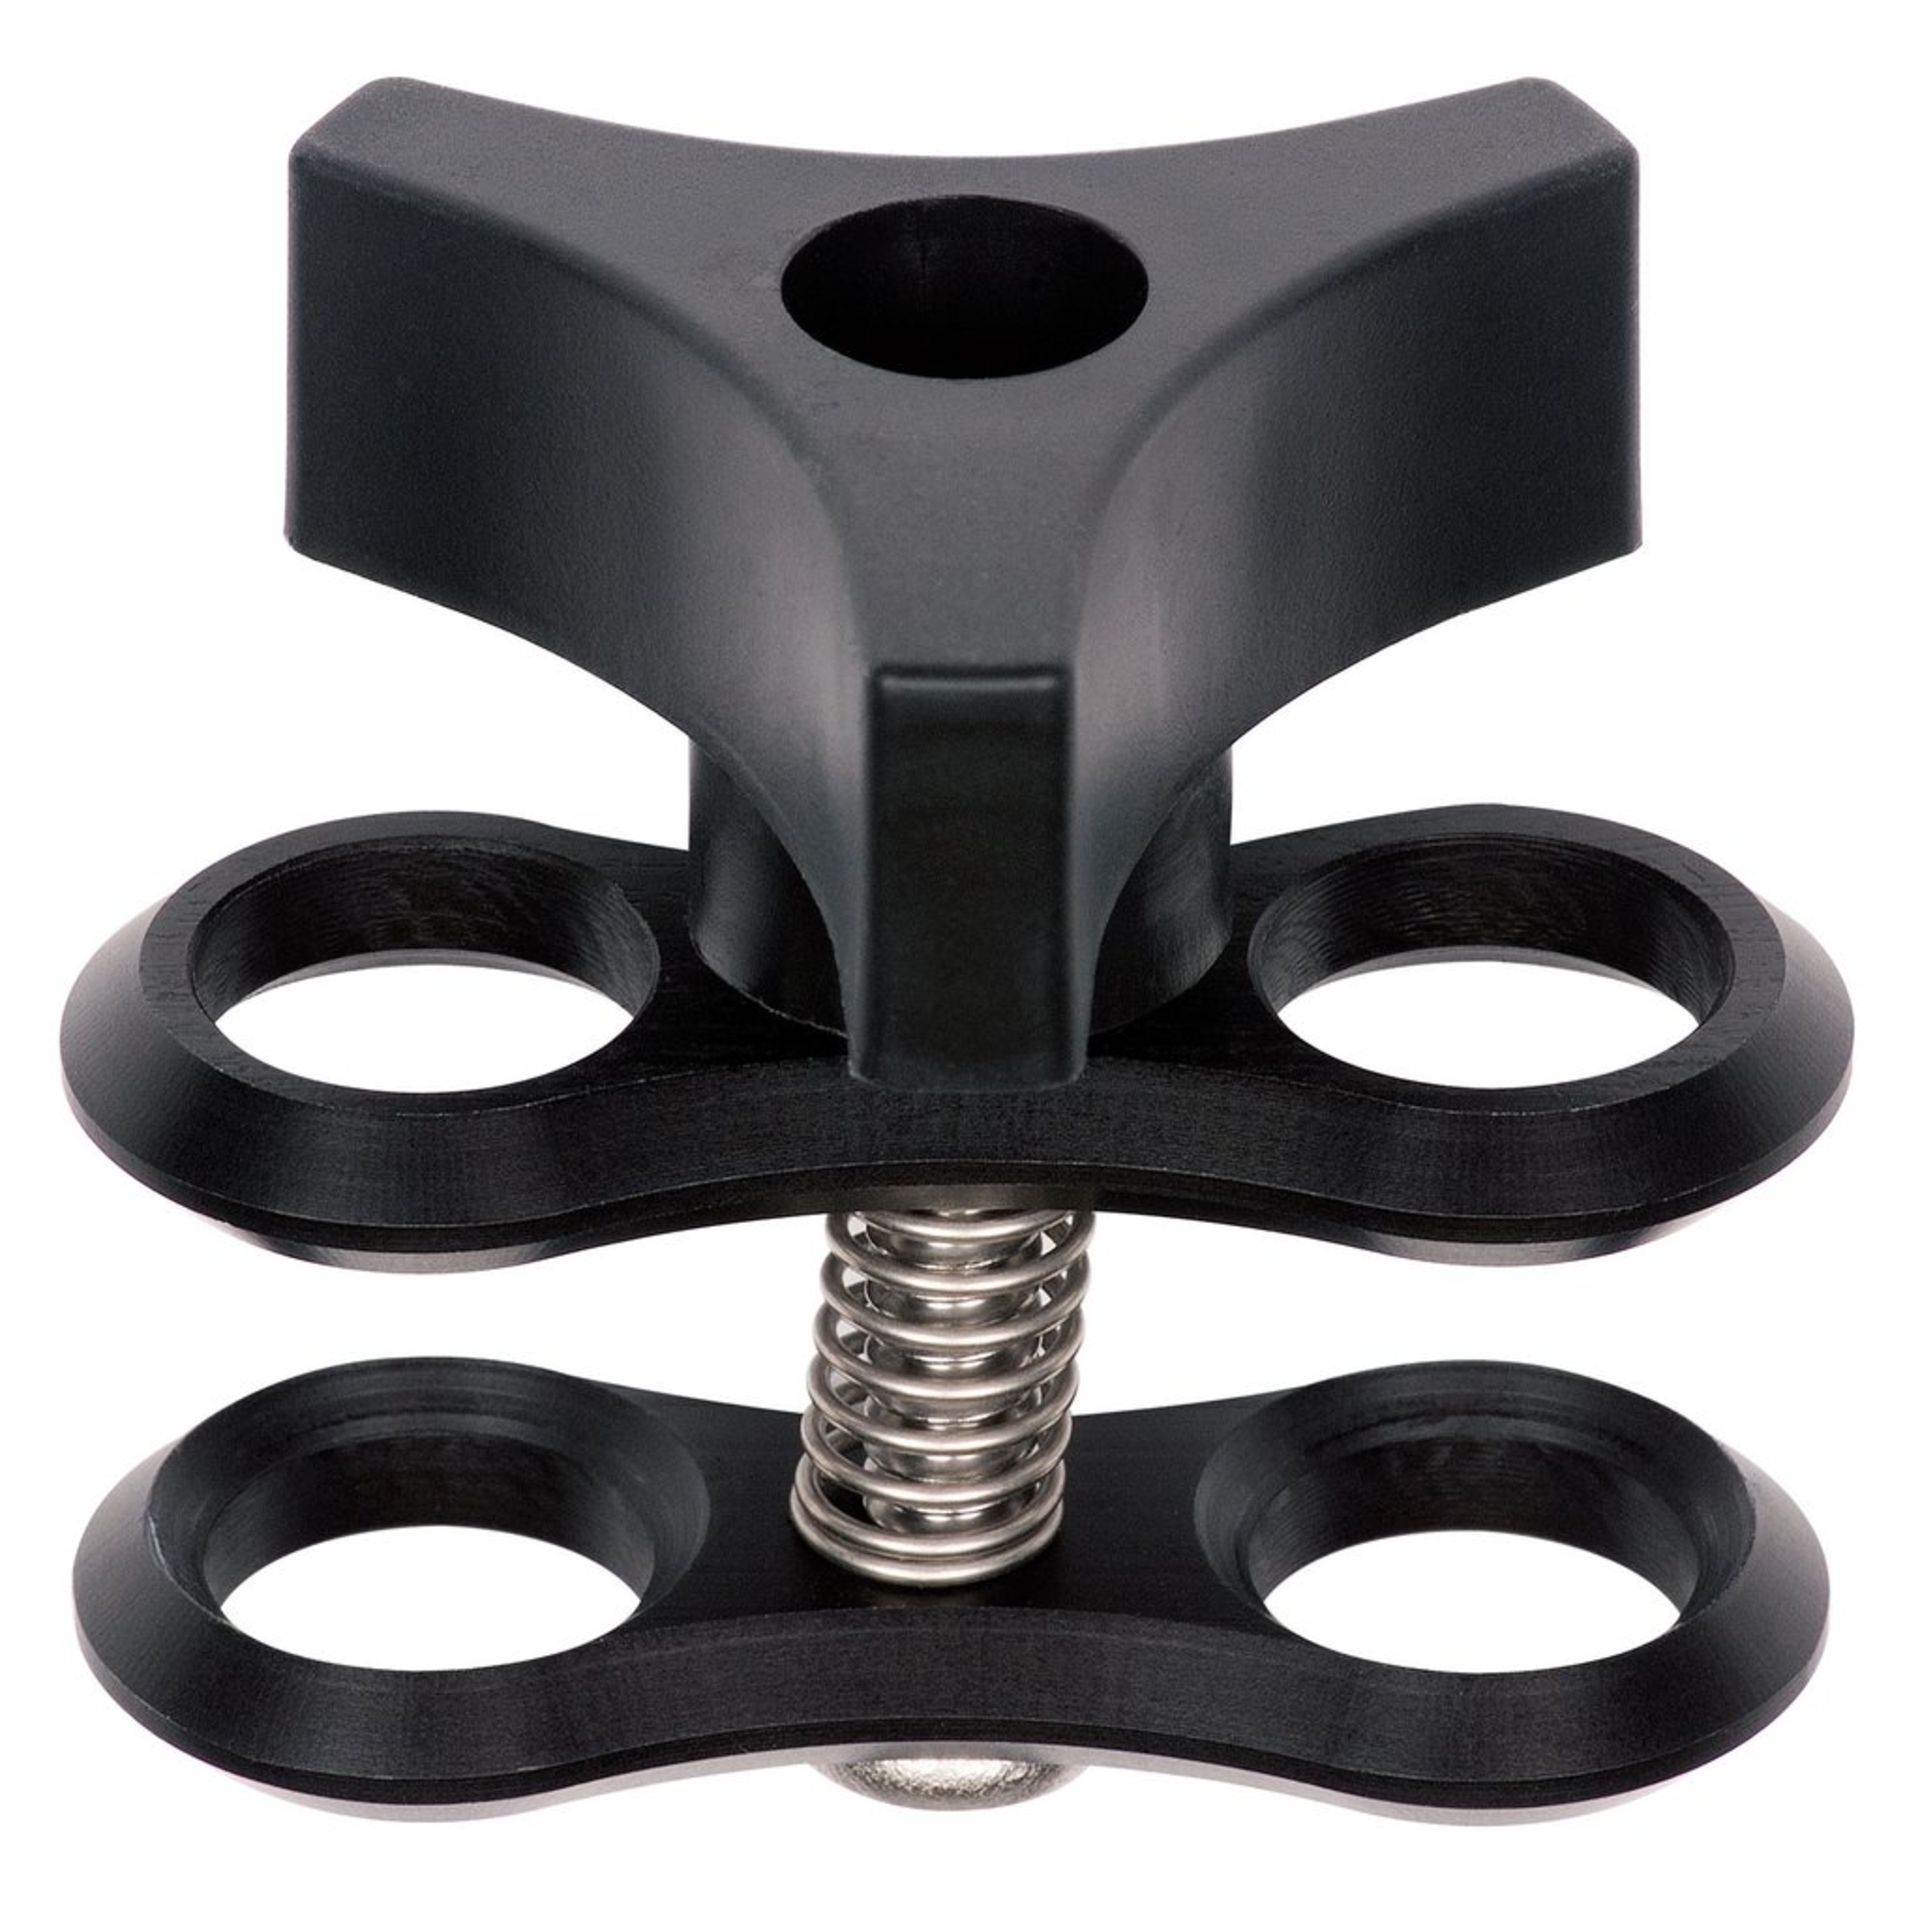 IKELITE 1-inch Ball Clamp for Lightweight Accessories